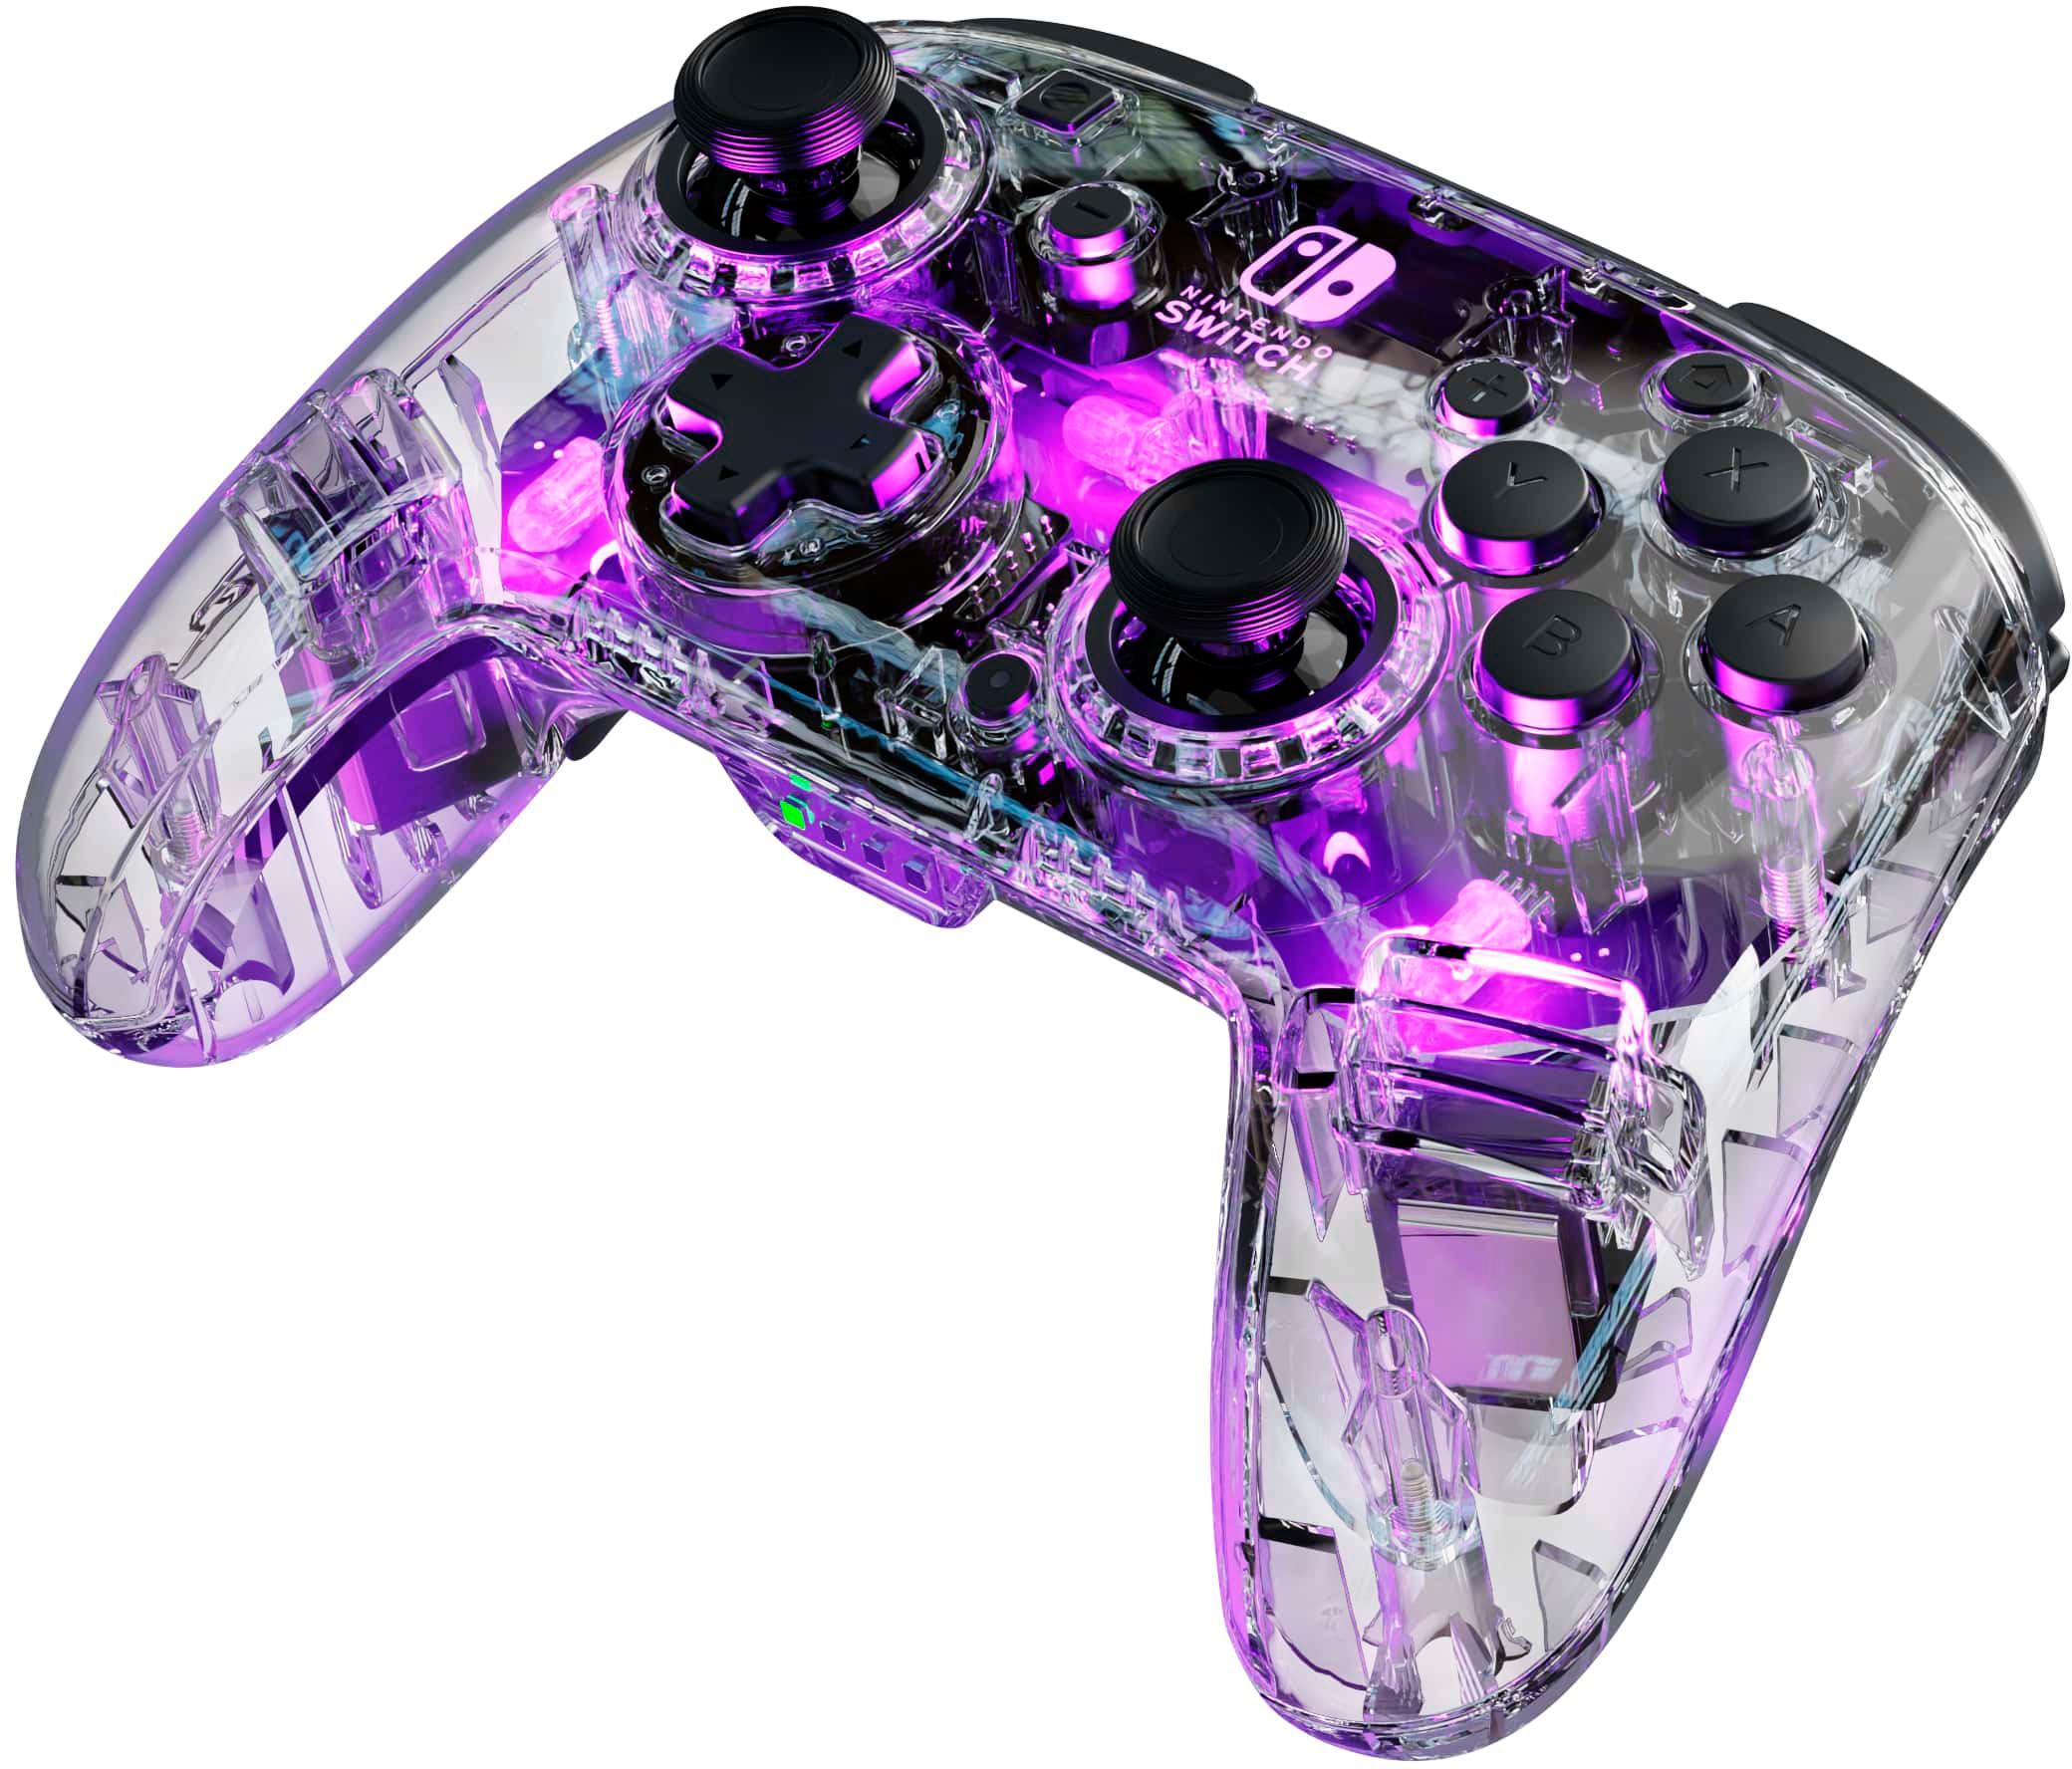 PDP Afterglow LED Wireless Deluxe Gaming Controller: Multicolor